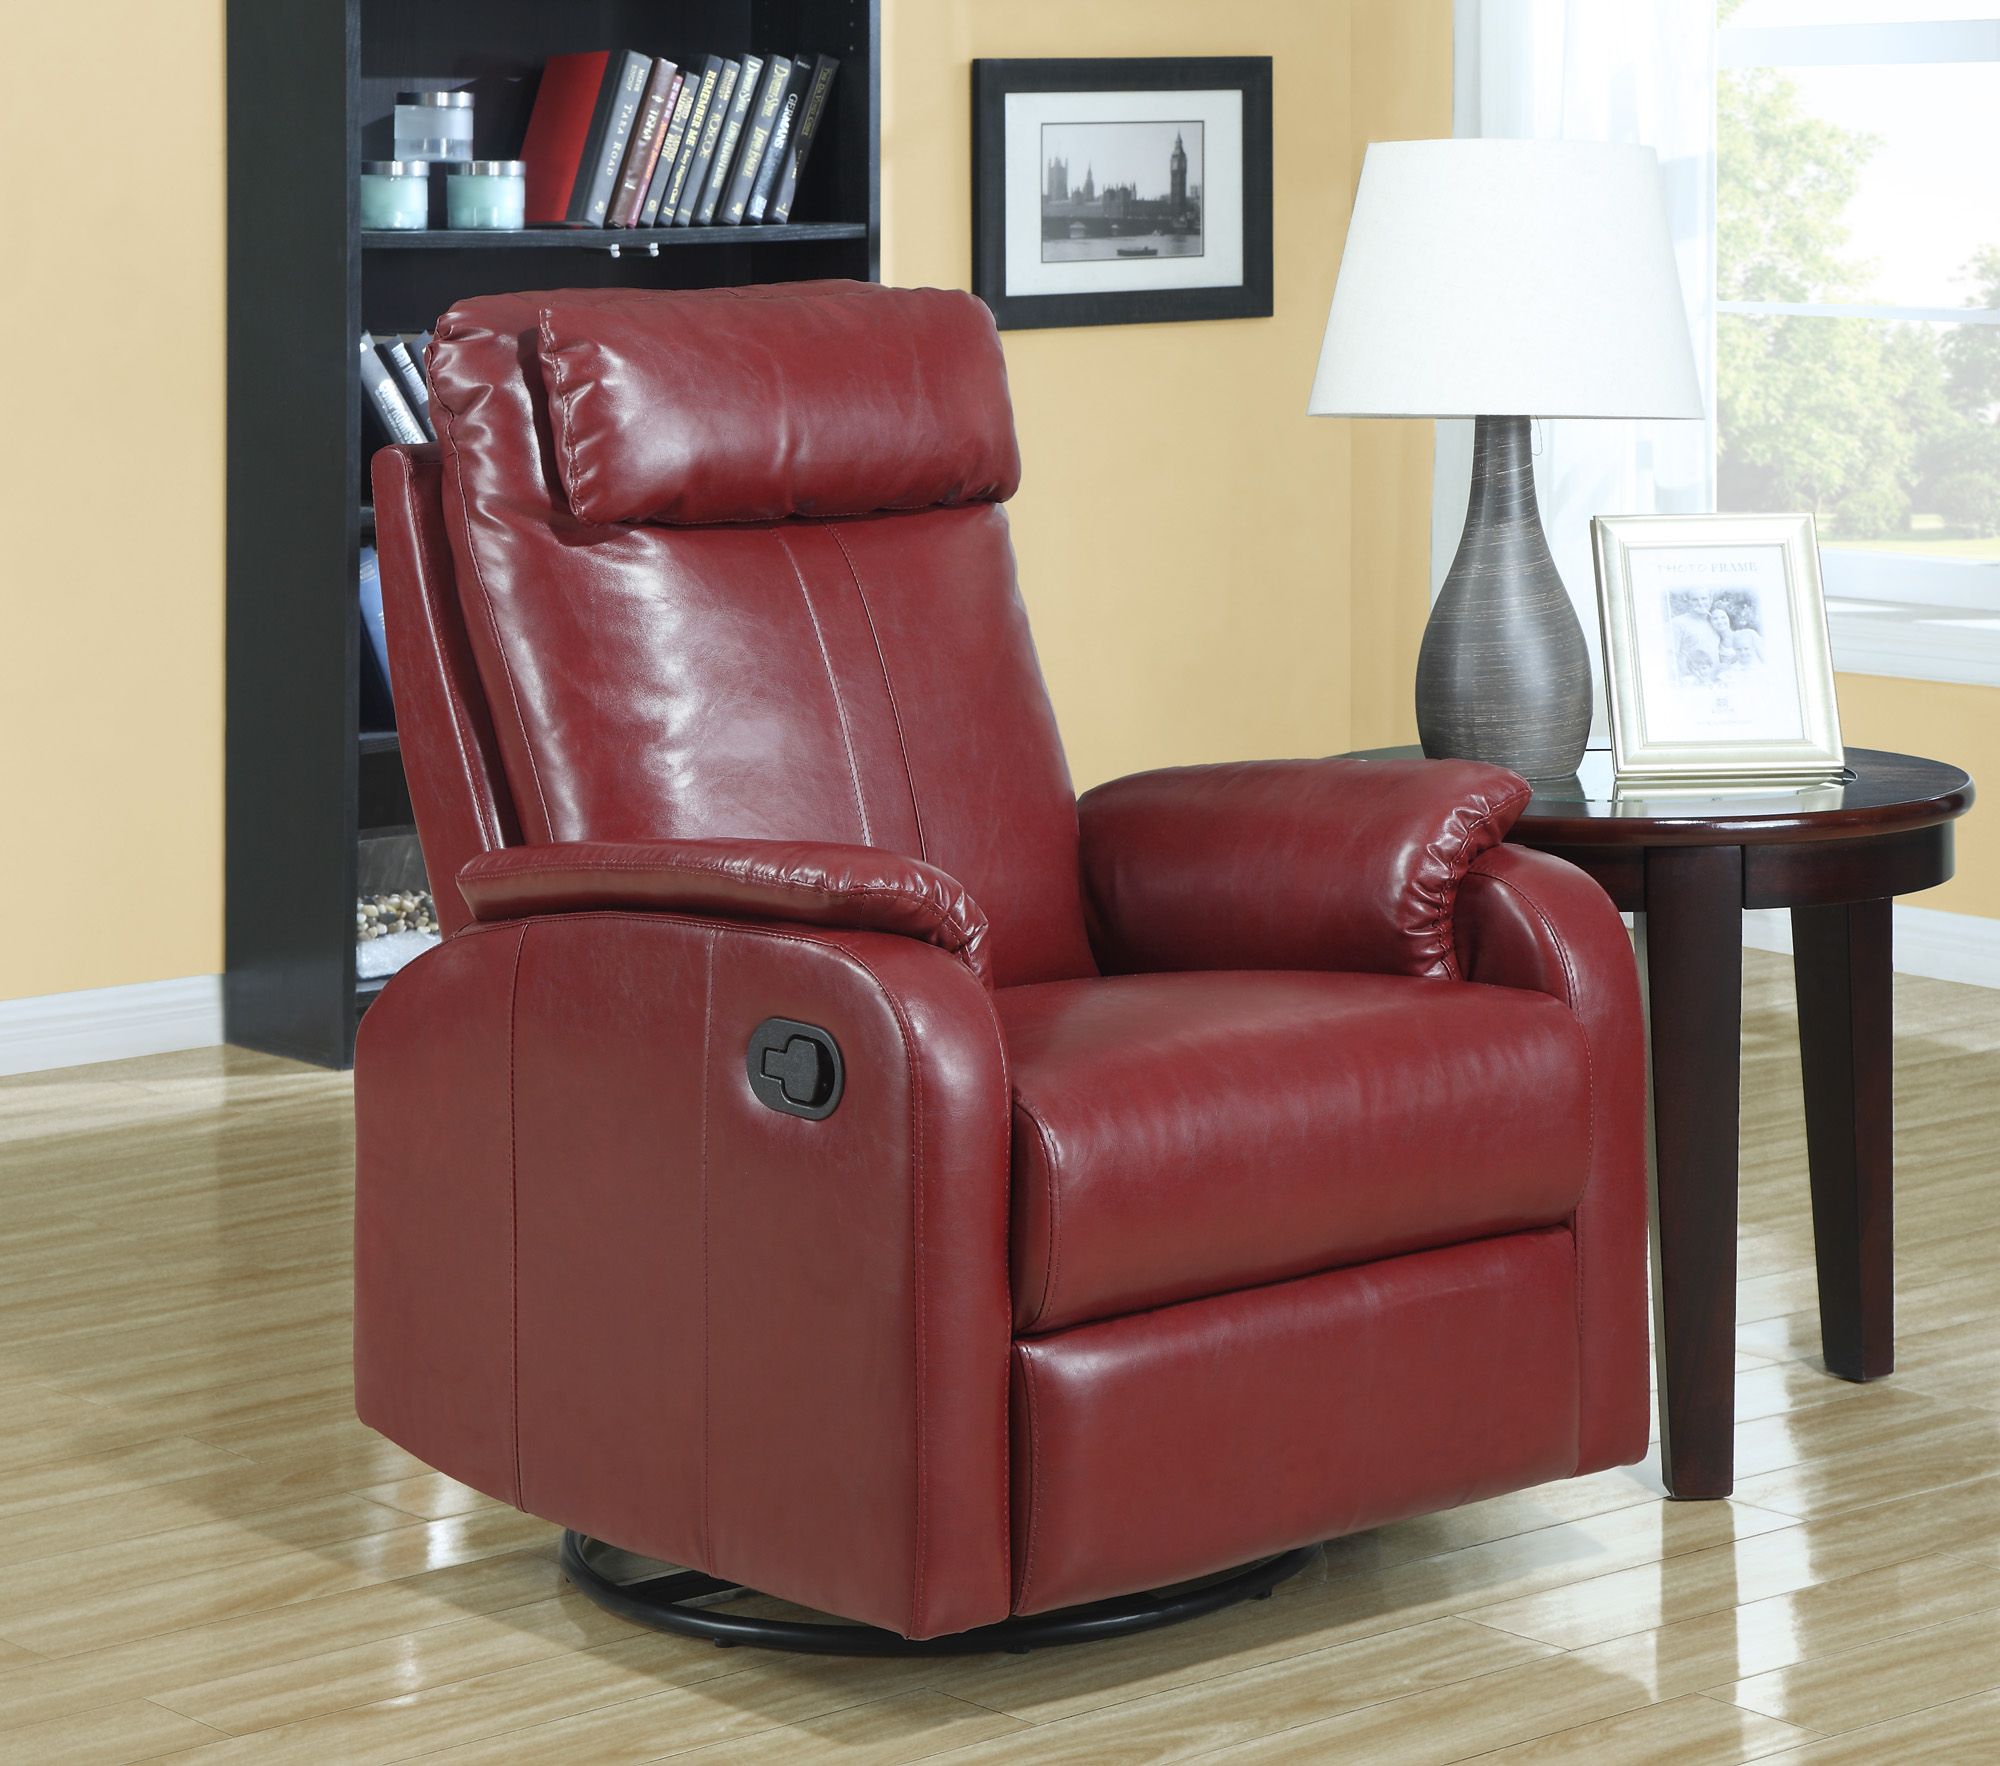 RECLINER - SWIVEL ROCKER / RED BONDED LEATHER FABRIC